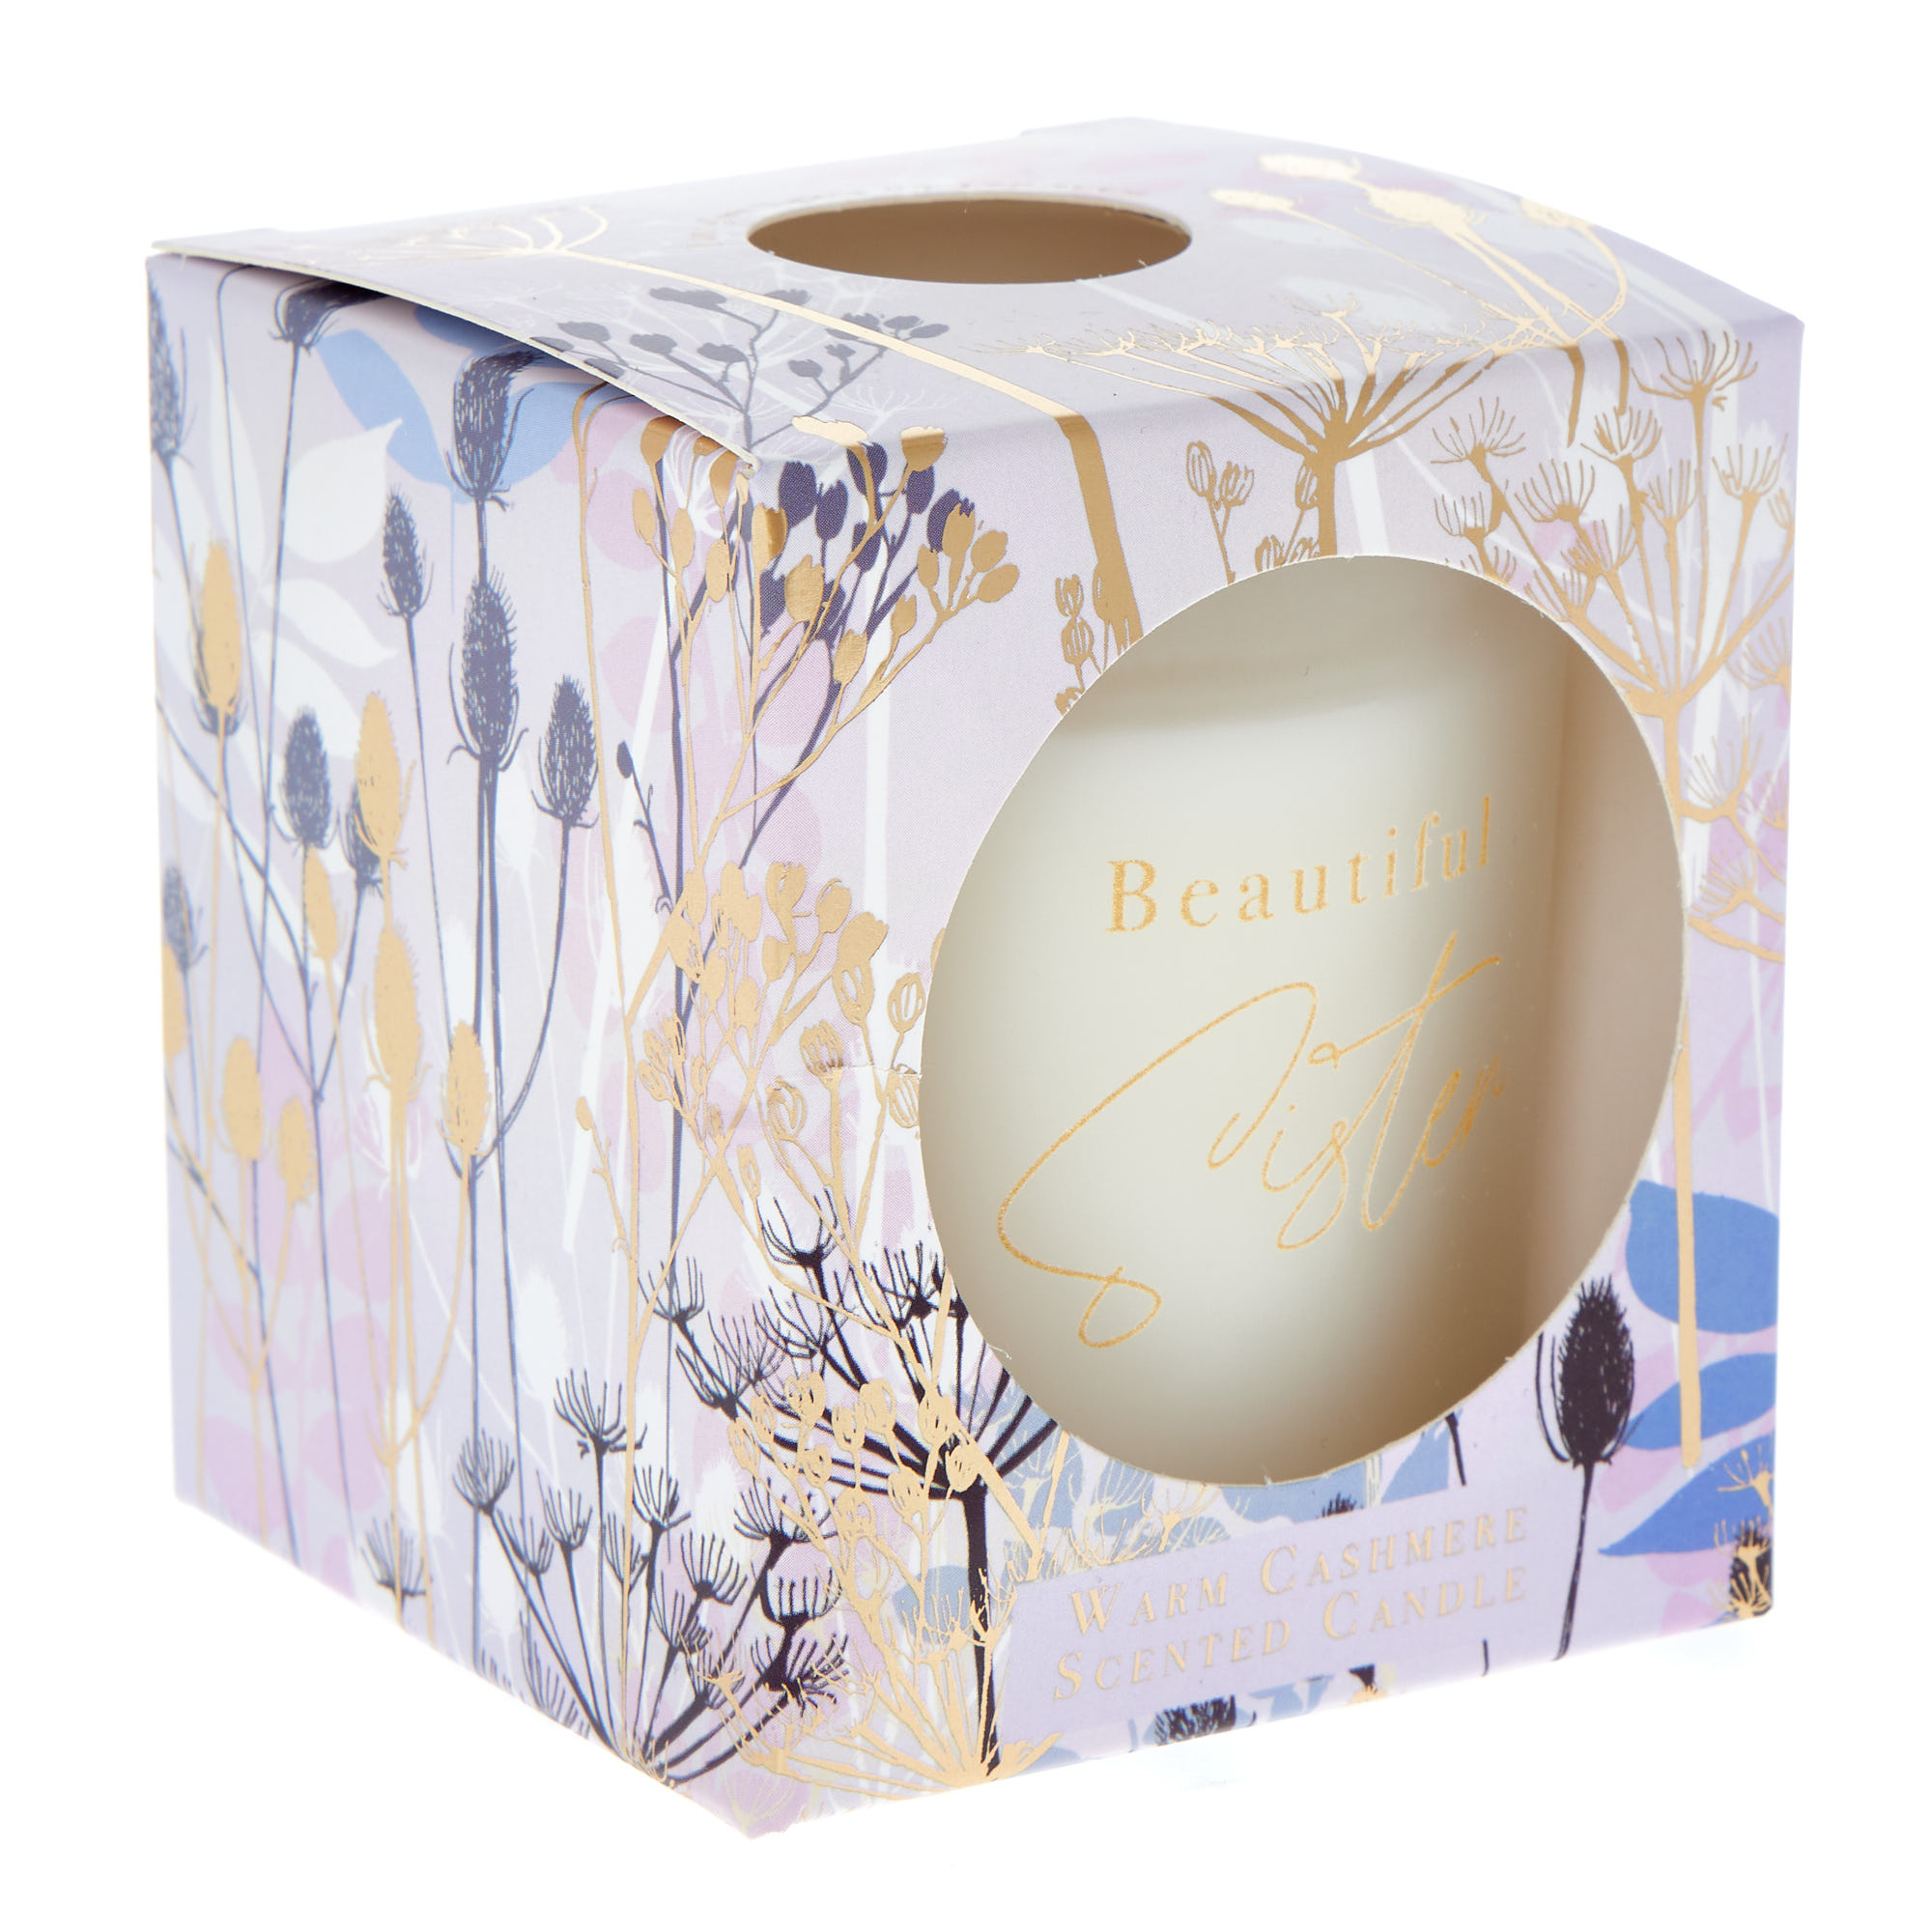 Beautiful Sister Warm Cashmere Scented Candle